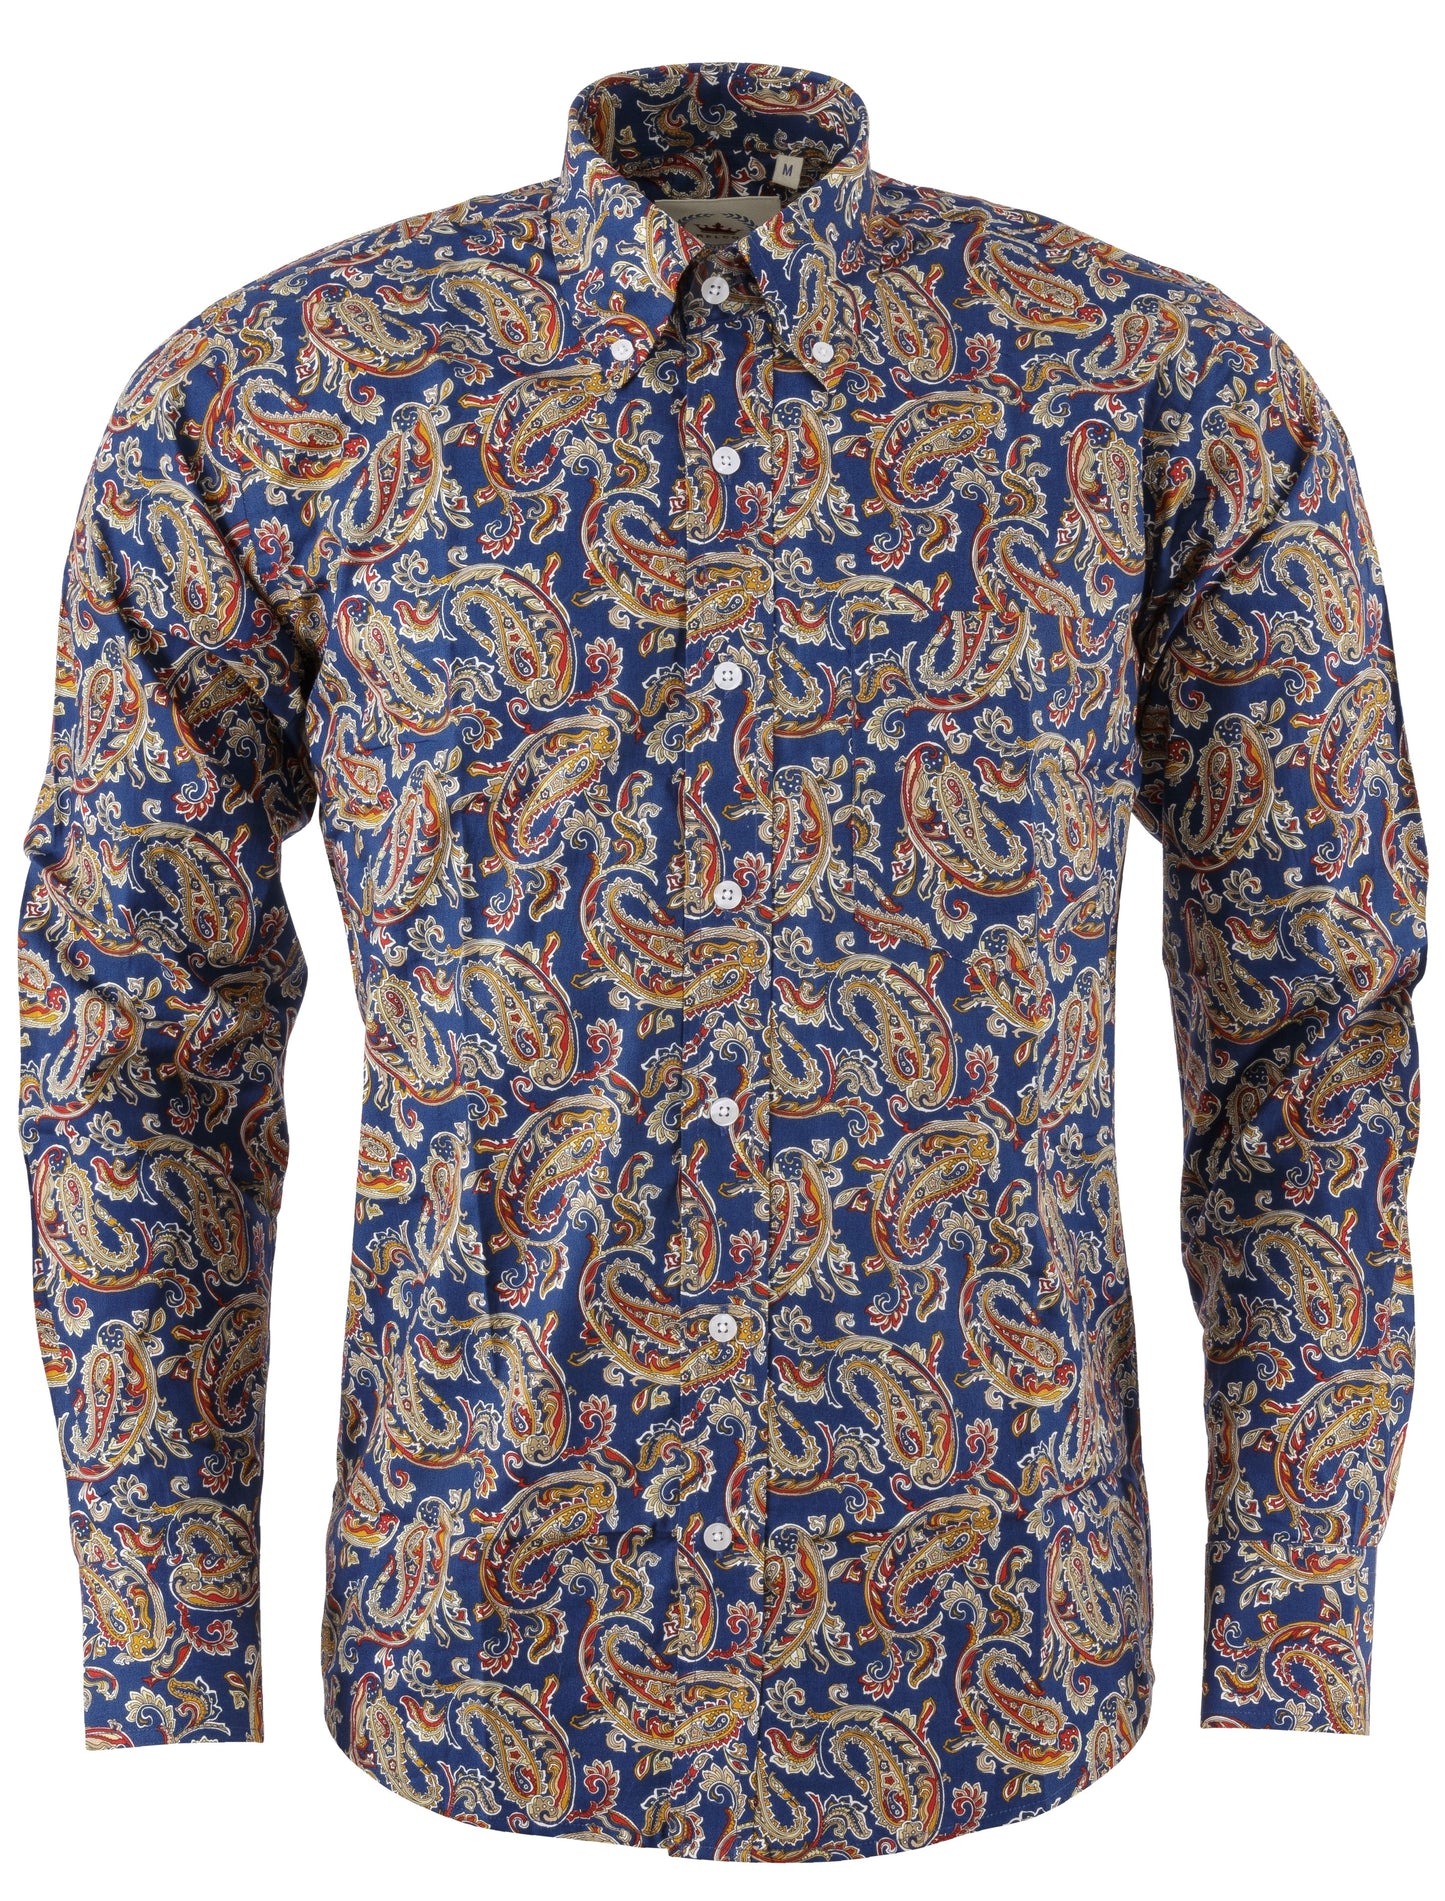 Relco Mens Navy Blue Paisley Long Sleeved Retro Mod Button Down Shirt